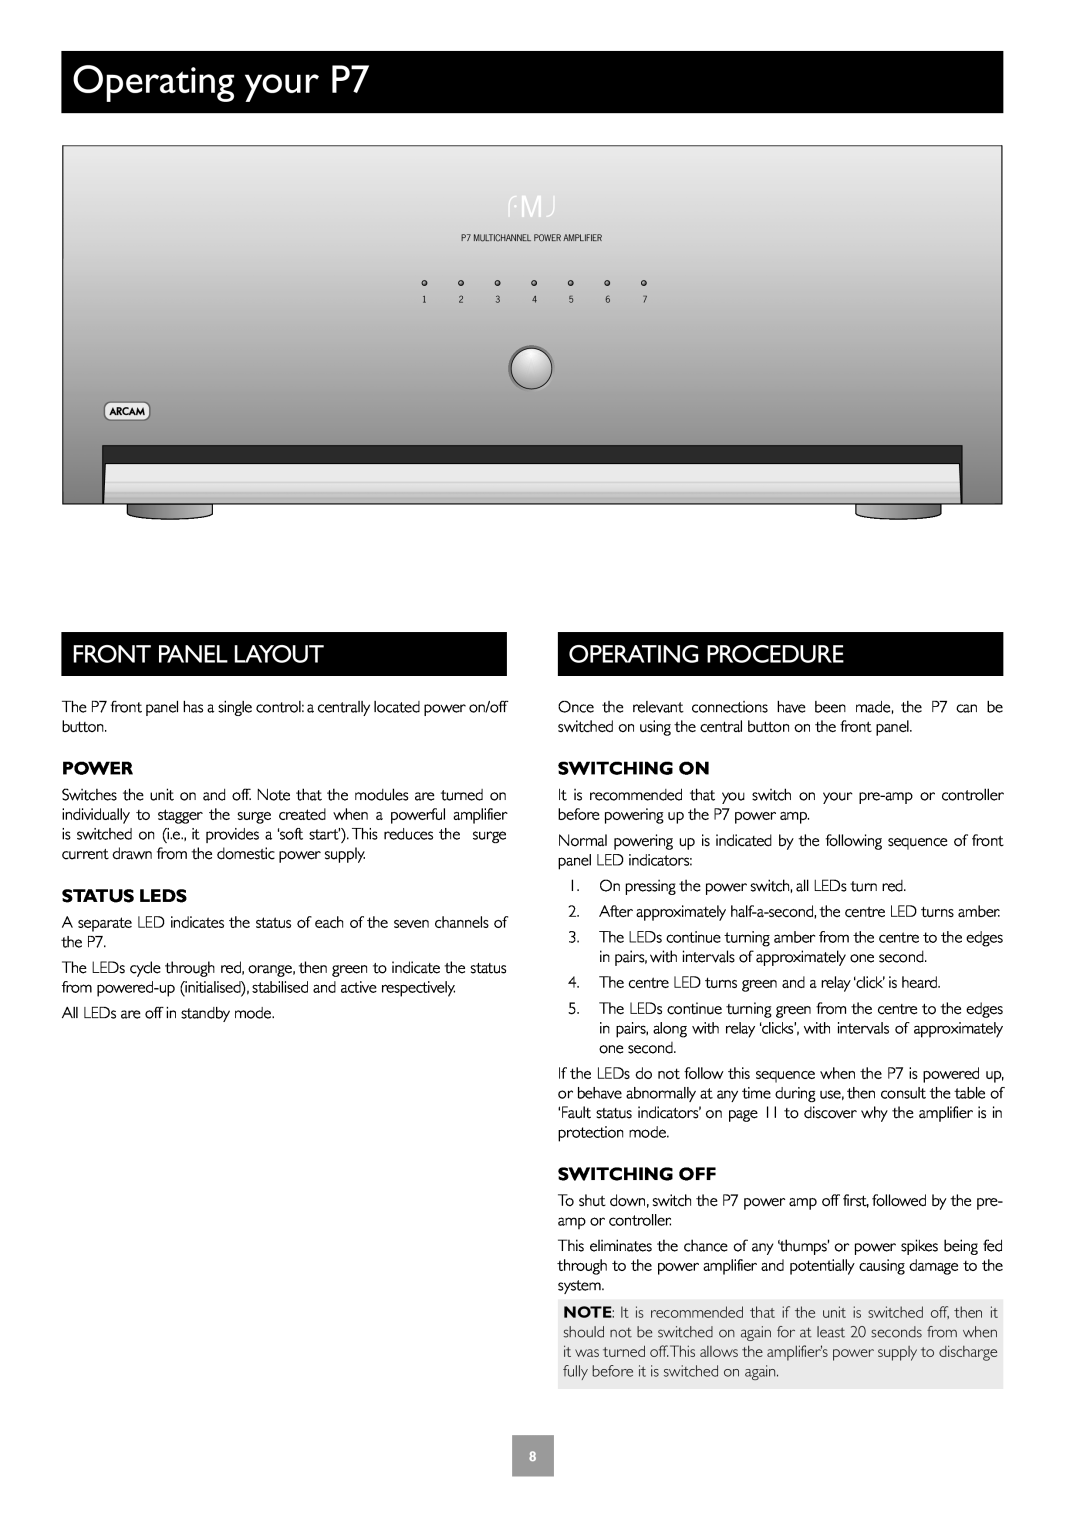 Arcam Multichannel Power Amplifier Operating your P7, Front Panel Layout, Operating Procedure, Status Leds, Switching On 